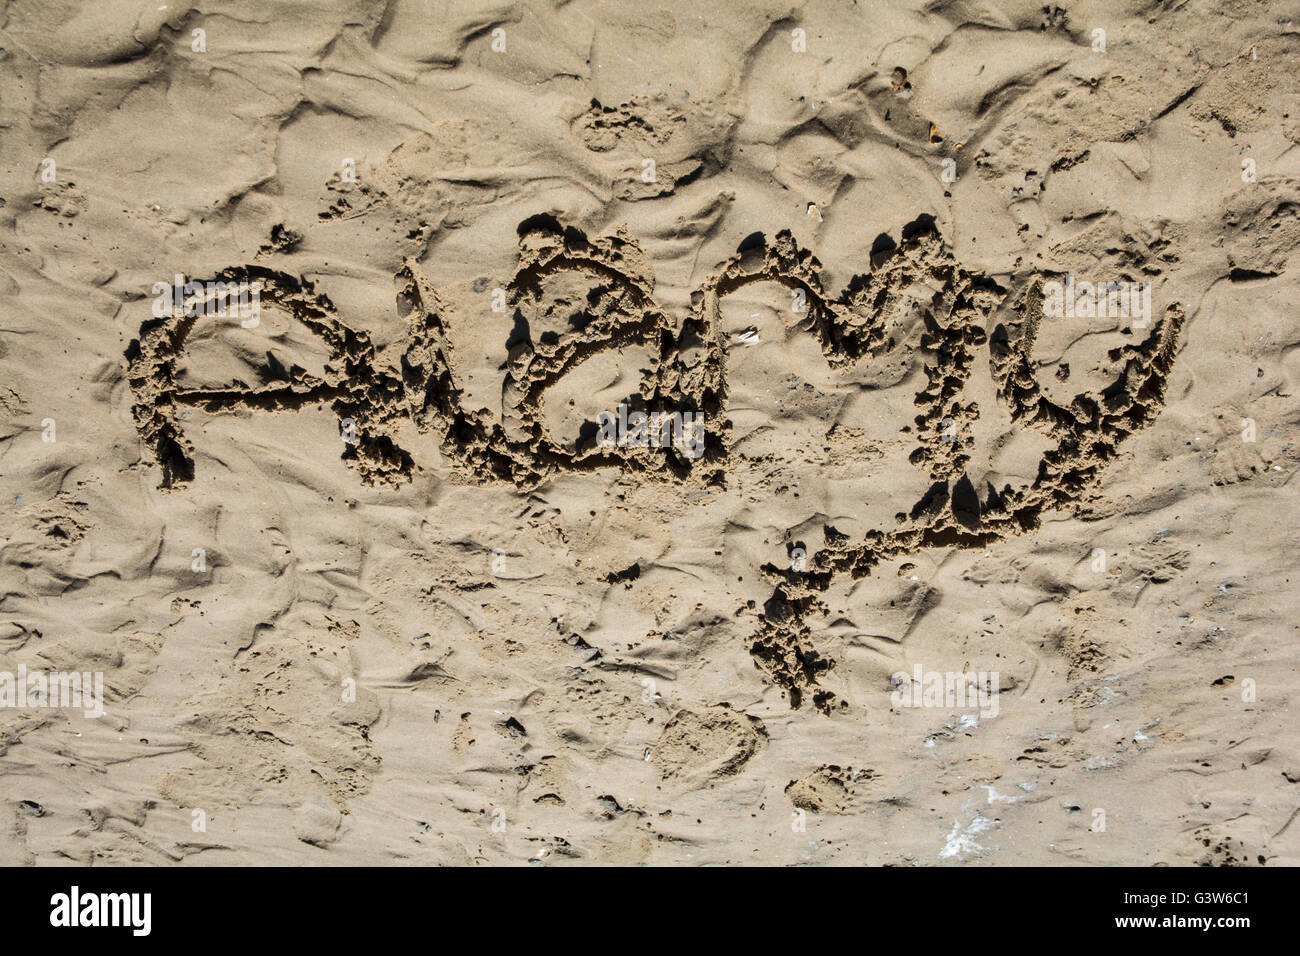 The word 'Alamy' drawn in the sand. Stock Photo